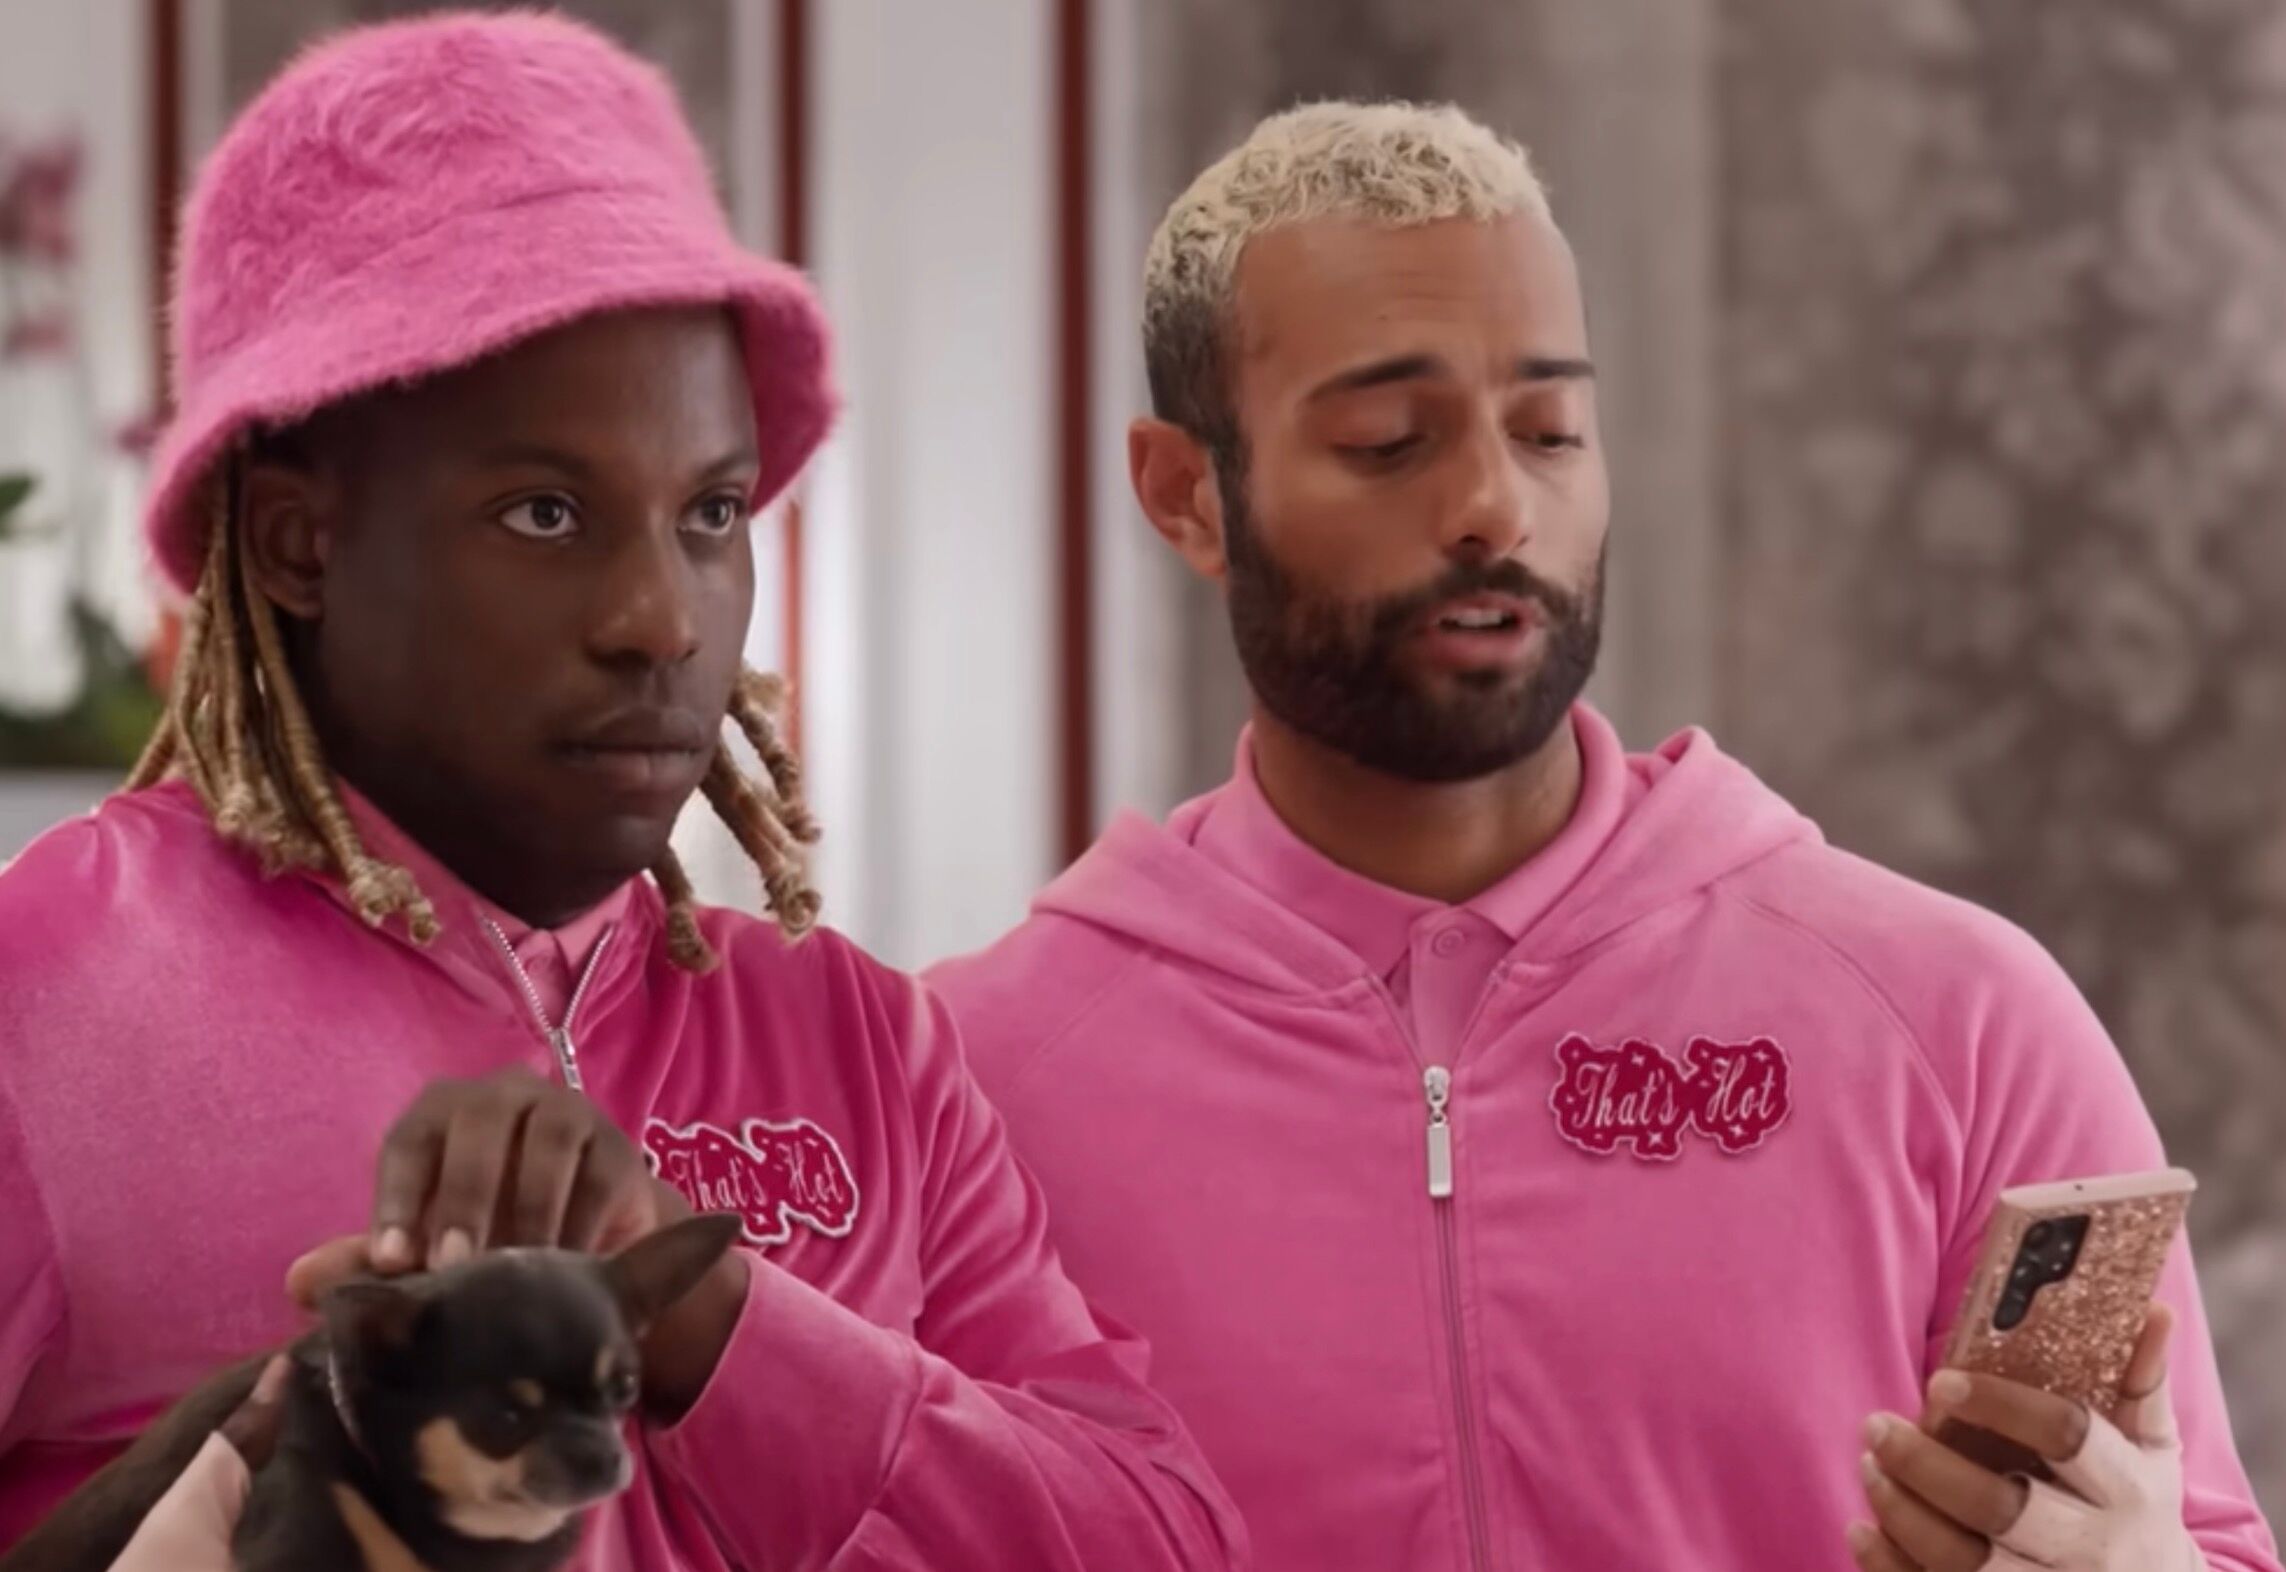 Two male presenting folks wearing pink, one holding a Chihuahua and the other texting